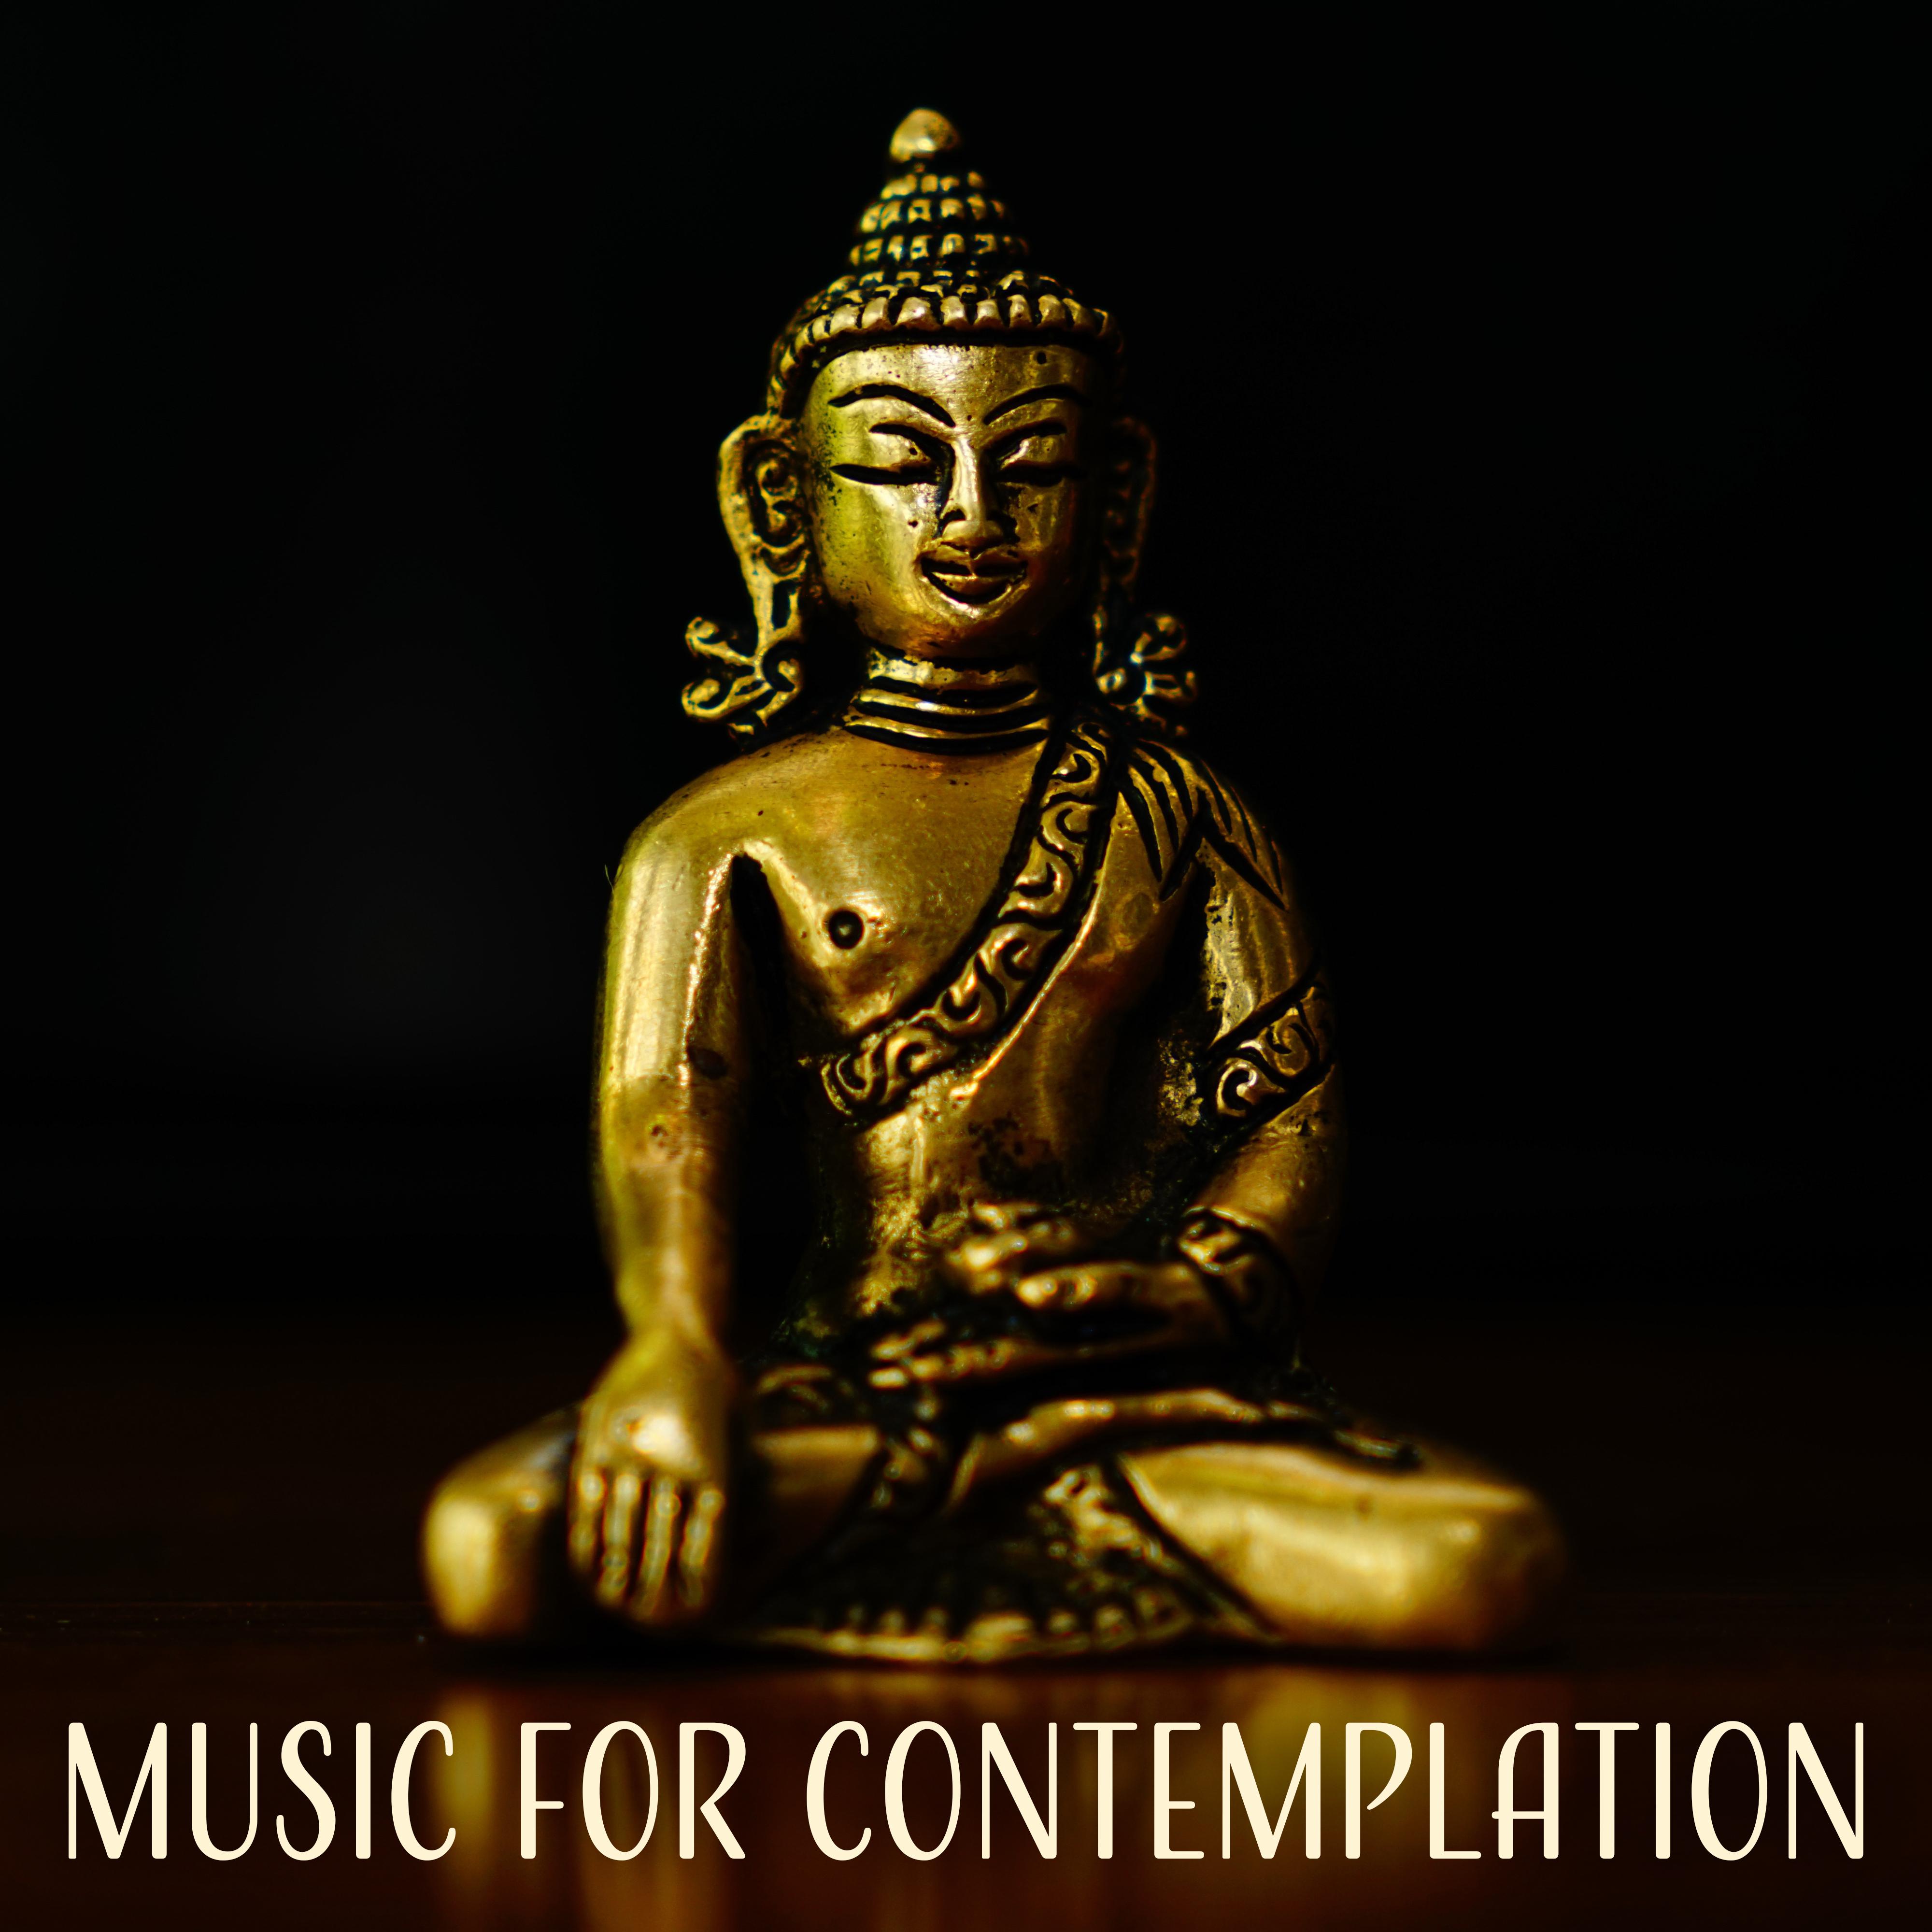 Music for Contemplation  New Age Music for Meditation, Yoga Music, Mindfulness, Deep Contemplation, Calming Sounds of Nature, Relaxing Music